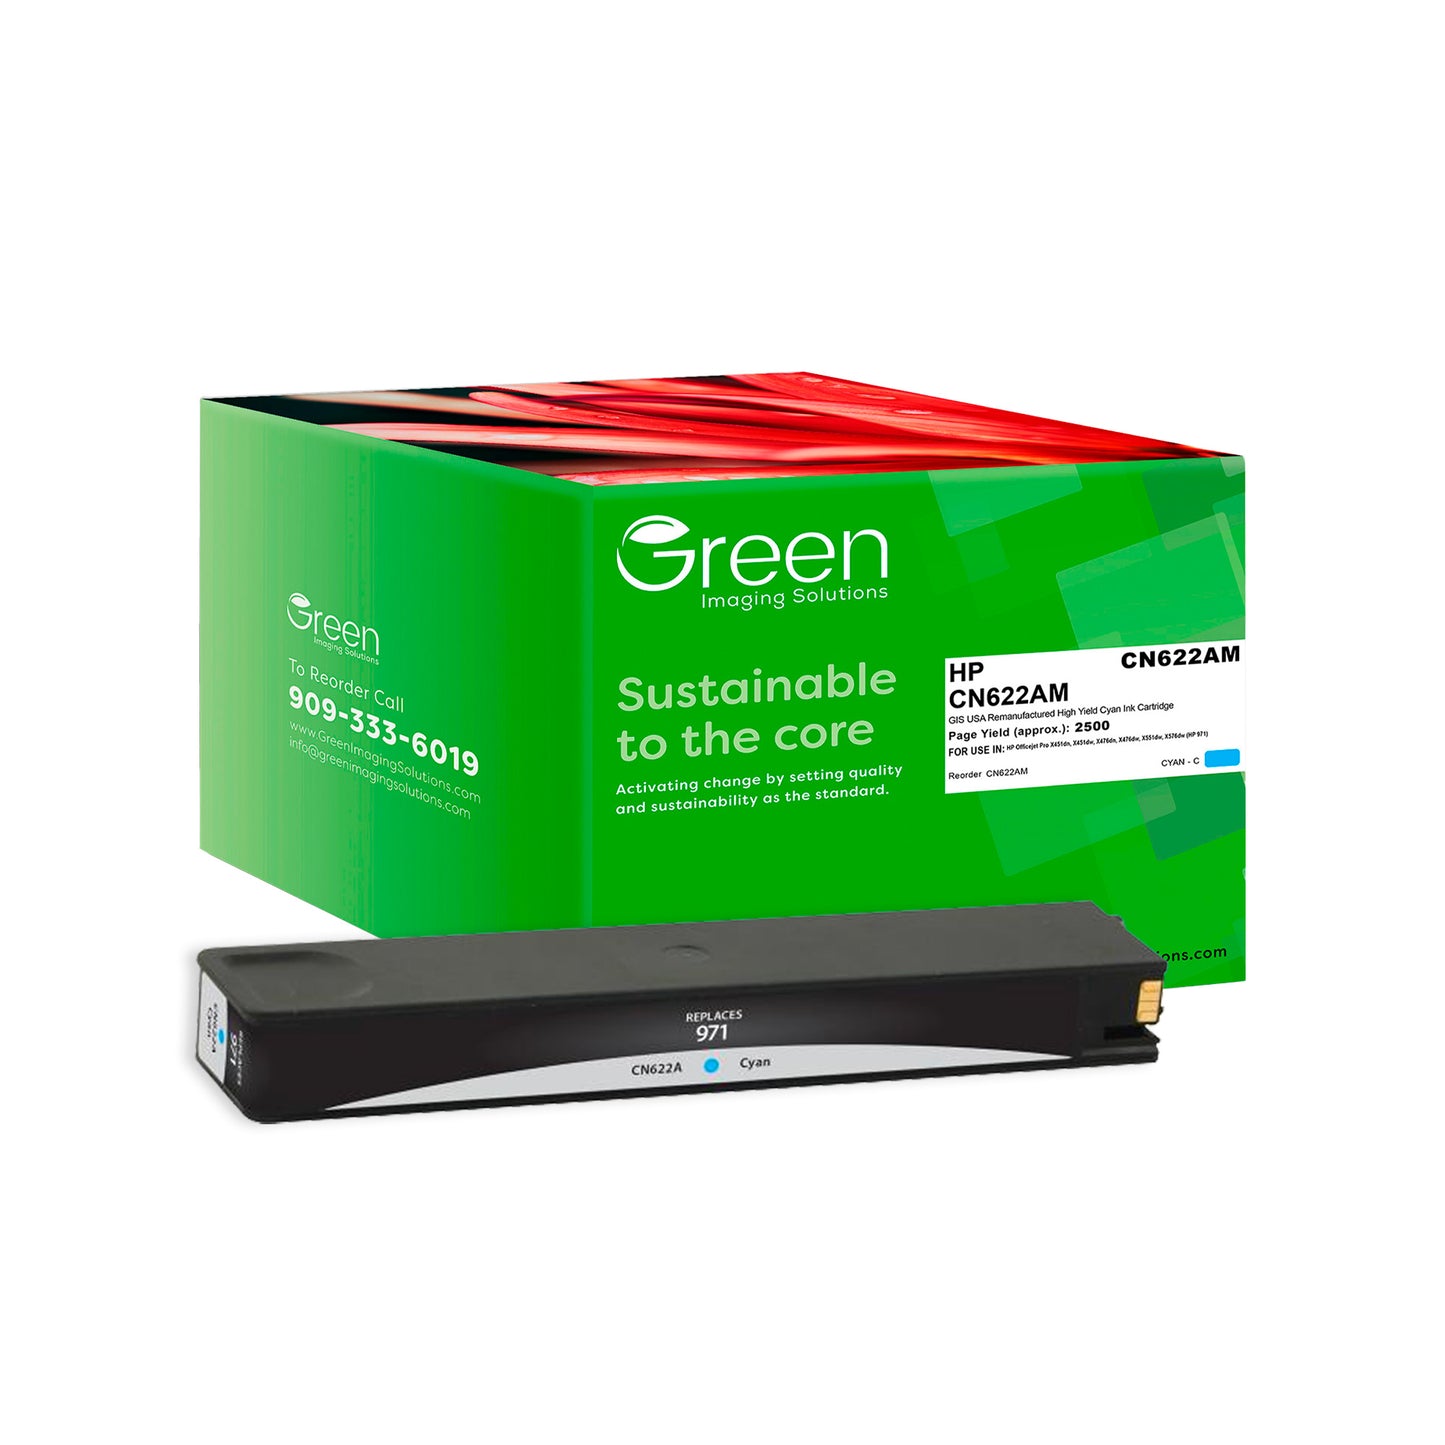 Green Imaging Solutions USA Remanufactured Cyan Ink Cartridge for HP 971 (CN622AM)